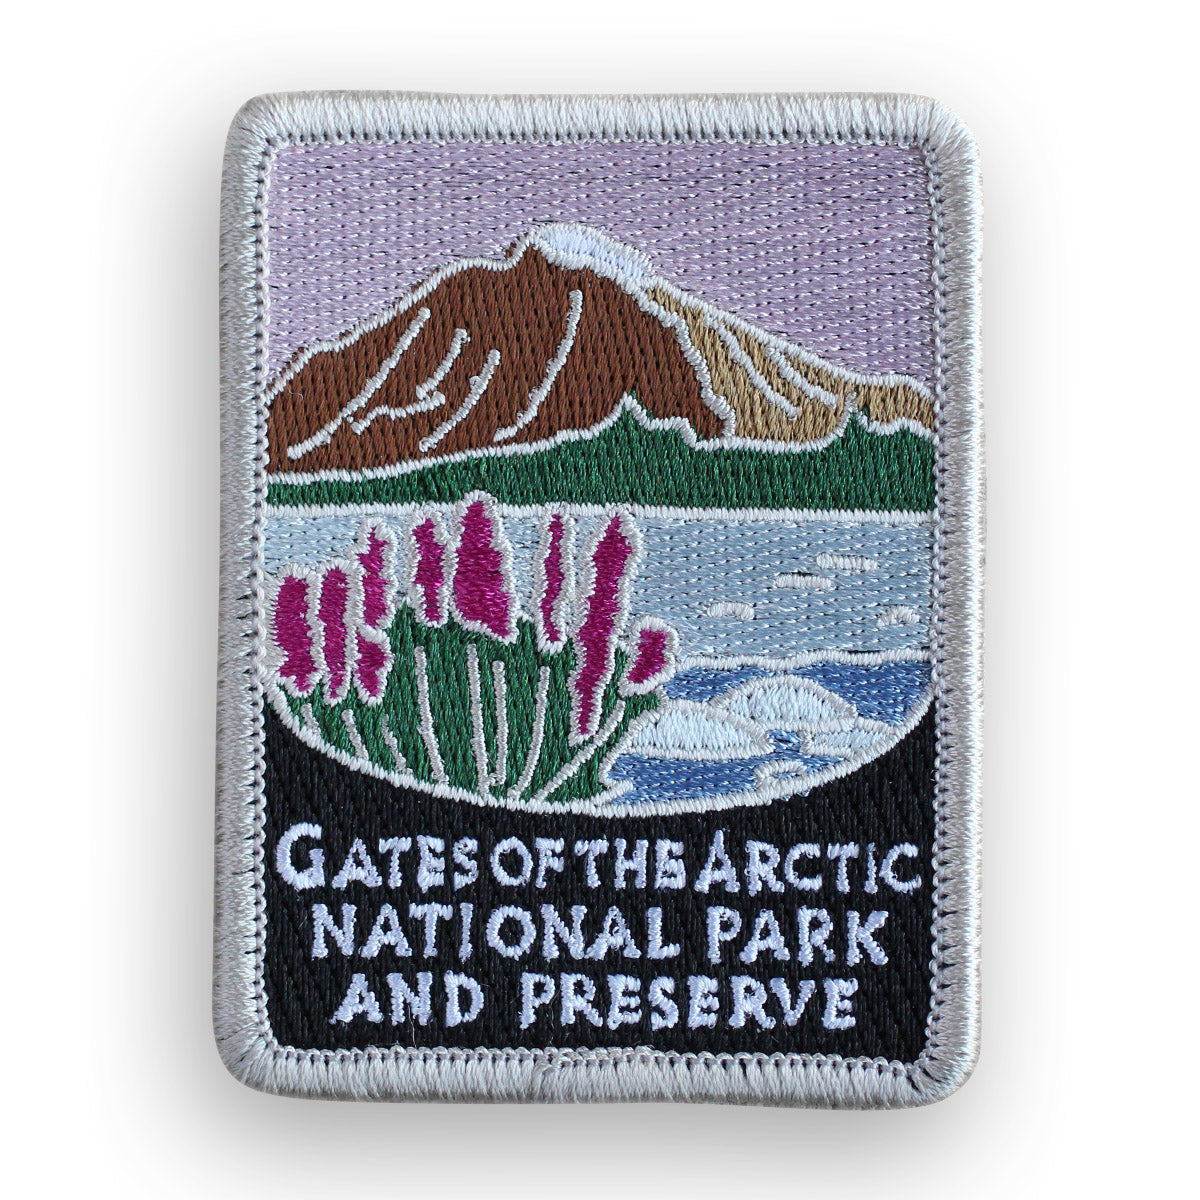 Gates Of The Arctic National Park And Preserve Traveler Patch